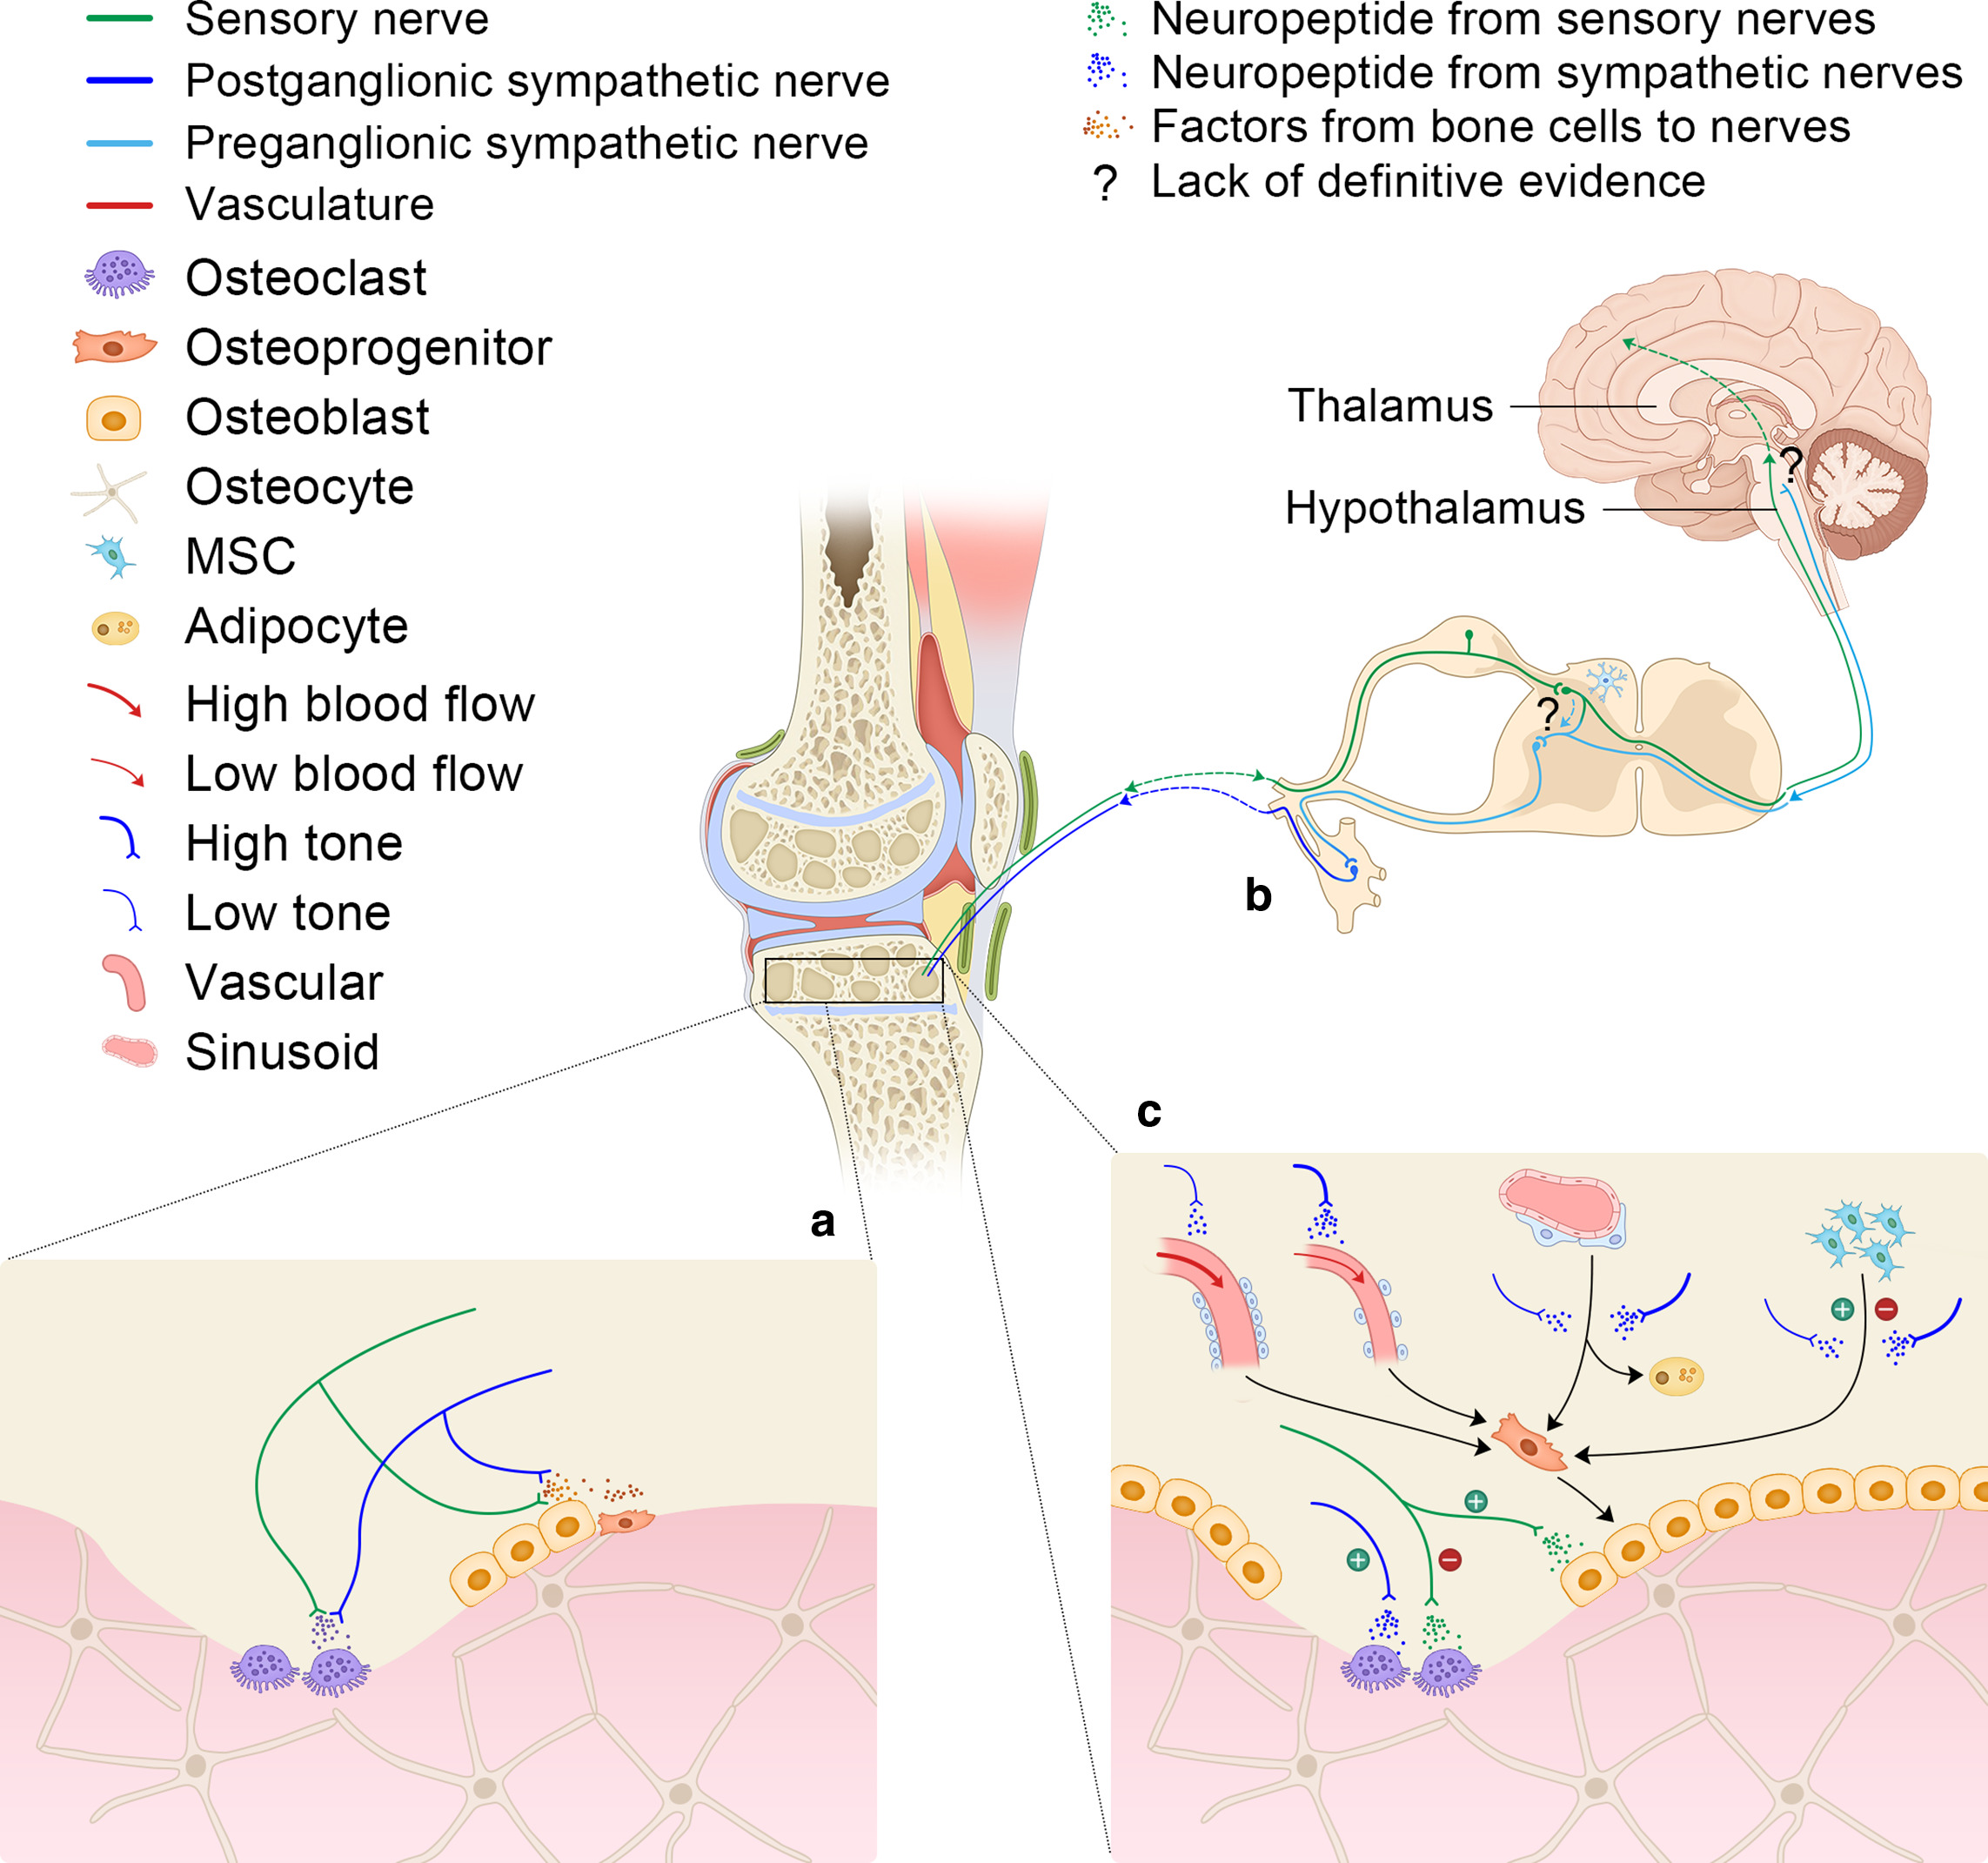 Fig. 3 
            The schematic of regulation of peripheral nerves in subchondral bone homeostasis and pain sensation. a) The local factors and molecules from resident cells, including osteoblast, osteoclast, and osteoprogenitors or other cells, activate sensory nerves, and then they mediate both metabolic and pain signals to central nervous system; local factors, such as netrin-1 and SLIT3, also affect both sensory nerve and sympathetic nerve by guiding their ingrowth. b) Sensory nerves collect and transport signals of peripheral tissue to brain after second-relay in the spinal cord. The pain signals are projected to brain cortex while sensory nerve mediates metabolic signals and turns down the tone of sympathetic signals at hypothalamus and spinal levels. c) Sympathetic tone regulates bone remodelling both directly and indirectly. Reduced sympathetic tone that is dependent or independent of sensory activity may promote proliferation of osteoprogenitors via increase of blood flow and subsequently increased generation of type H vessel. Reduced sympathetic tone also promotes mesenchymal stem cells (MSCs) to differentiate into adipocyte and directly promote the proliferation and differentiation of osteoblast lineage cells. Sympathetic molecules including neuropeptide Y and vasoactive intestinal polypeptide promote osteoclastogenesis, and inhibit the activity and differentiation of osteoblast lineage cells. The sensory molecules, such as calcitonin gene-related peptide and substance p, have a dual role in the inhibition of osteoclast activity and promotion of osteoblast lineage cells.
          